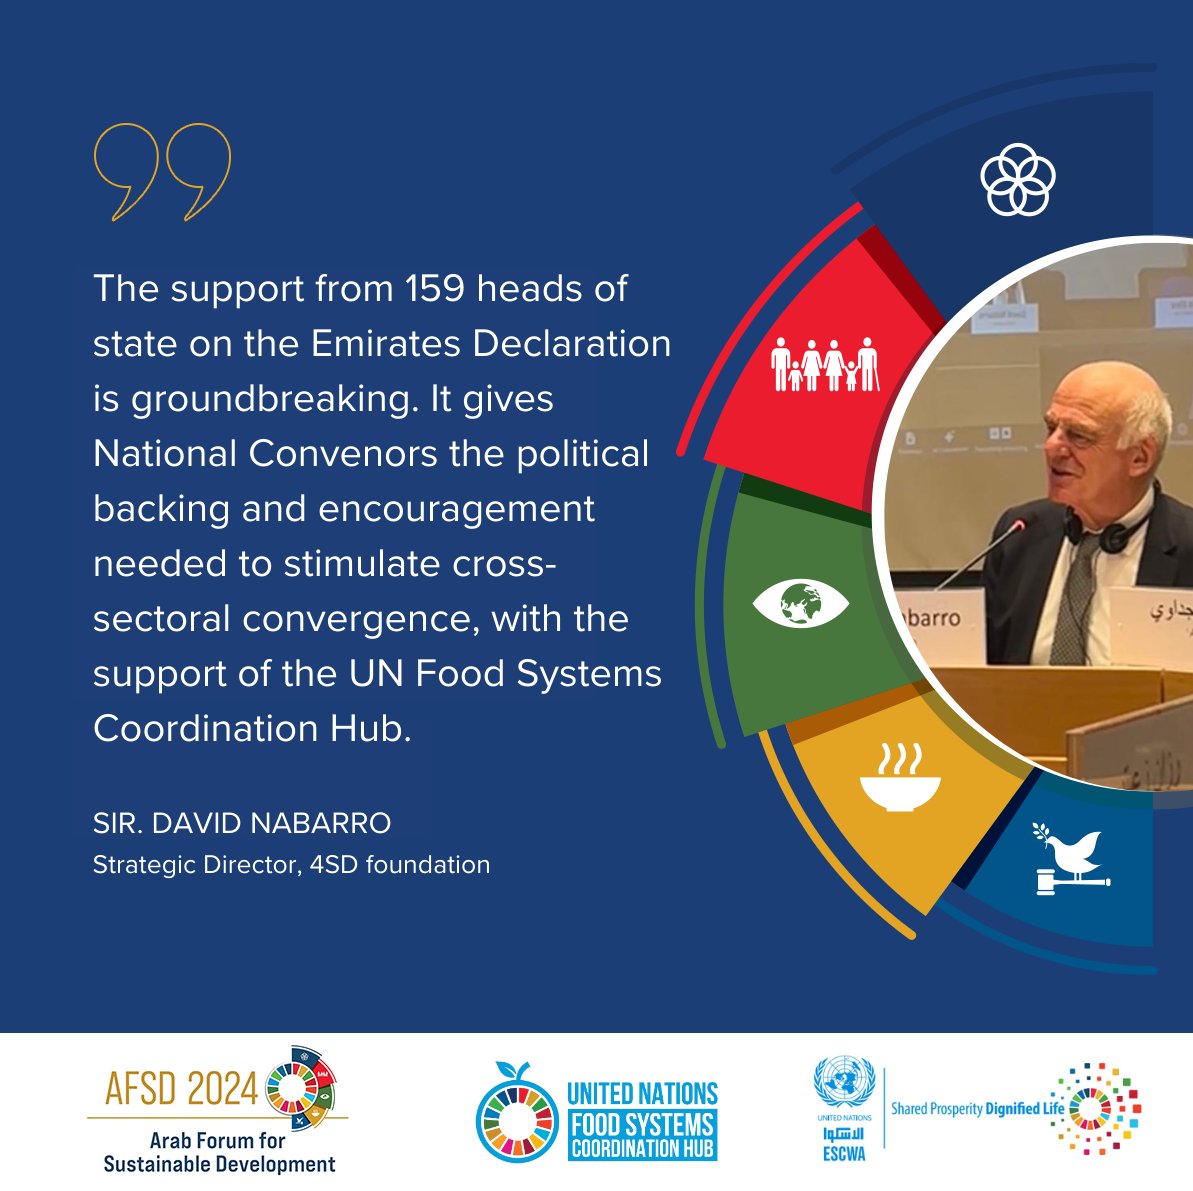 “The journey is tough, but the direction is clear,” says @davidnabarro at #AFSD2024. The session focused on actionable steps within the Arab region for sustainable #FoodSystems, #ClimateAction and more, inspired by the UN Secretary-General’s Call to Action.